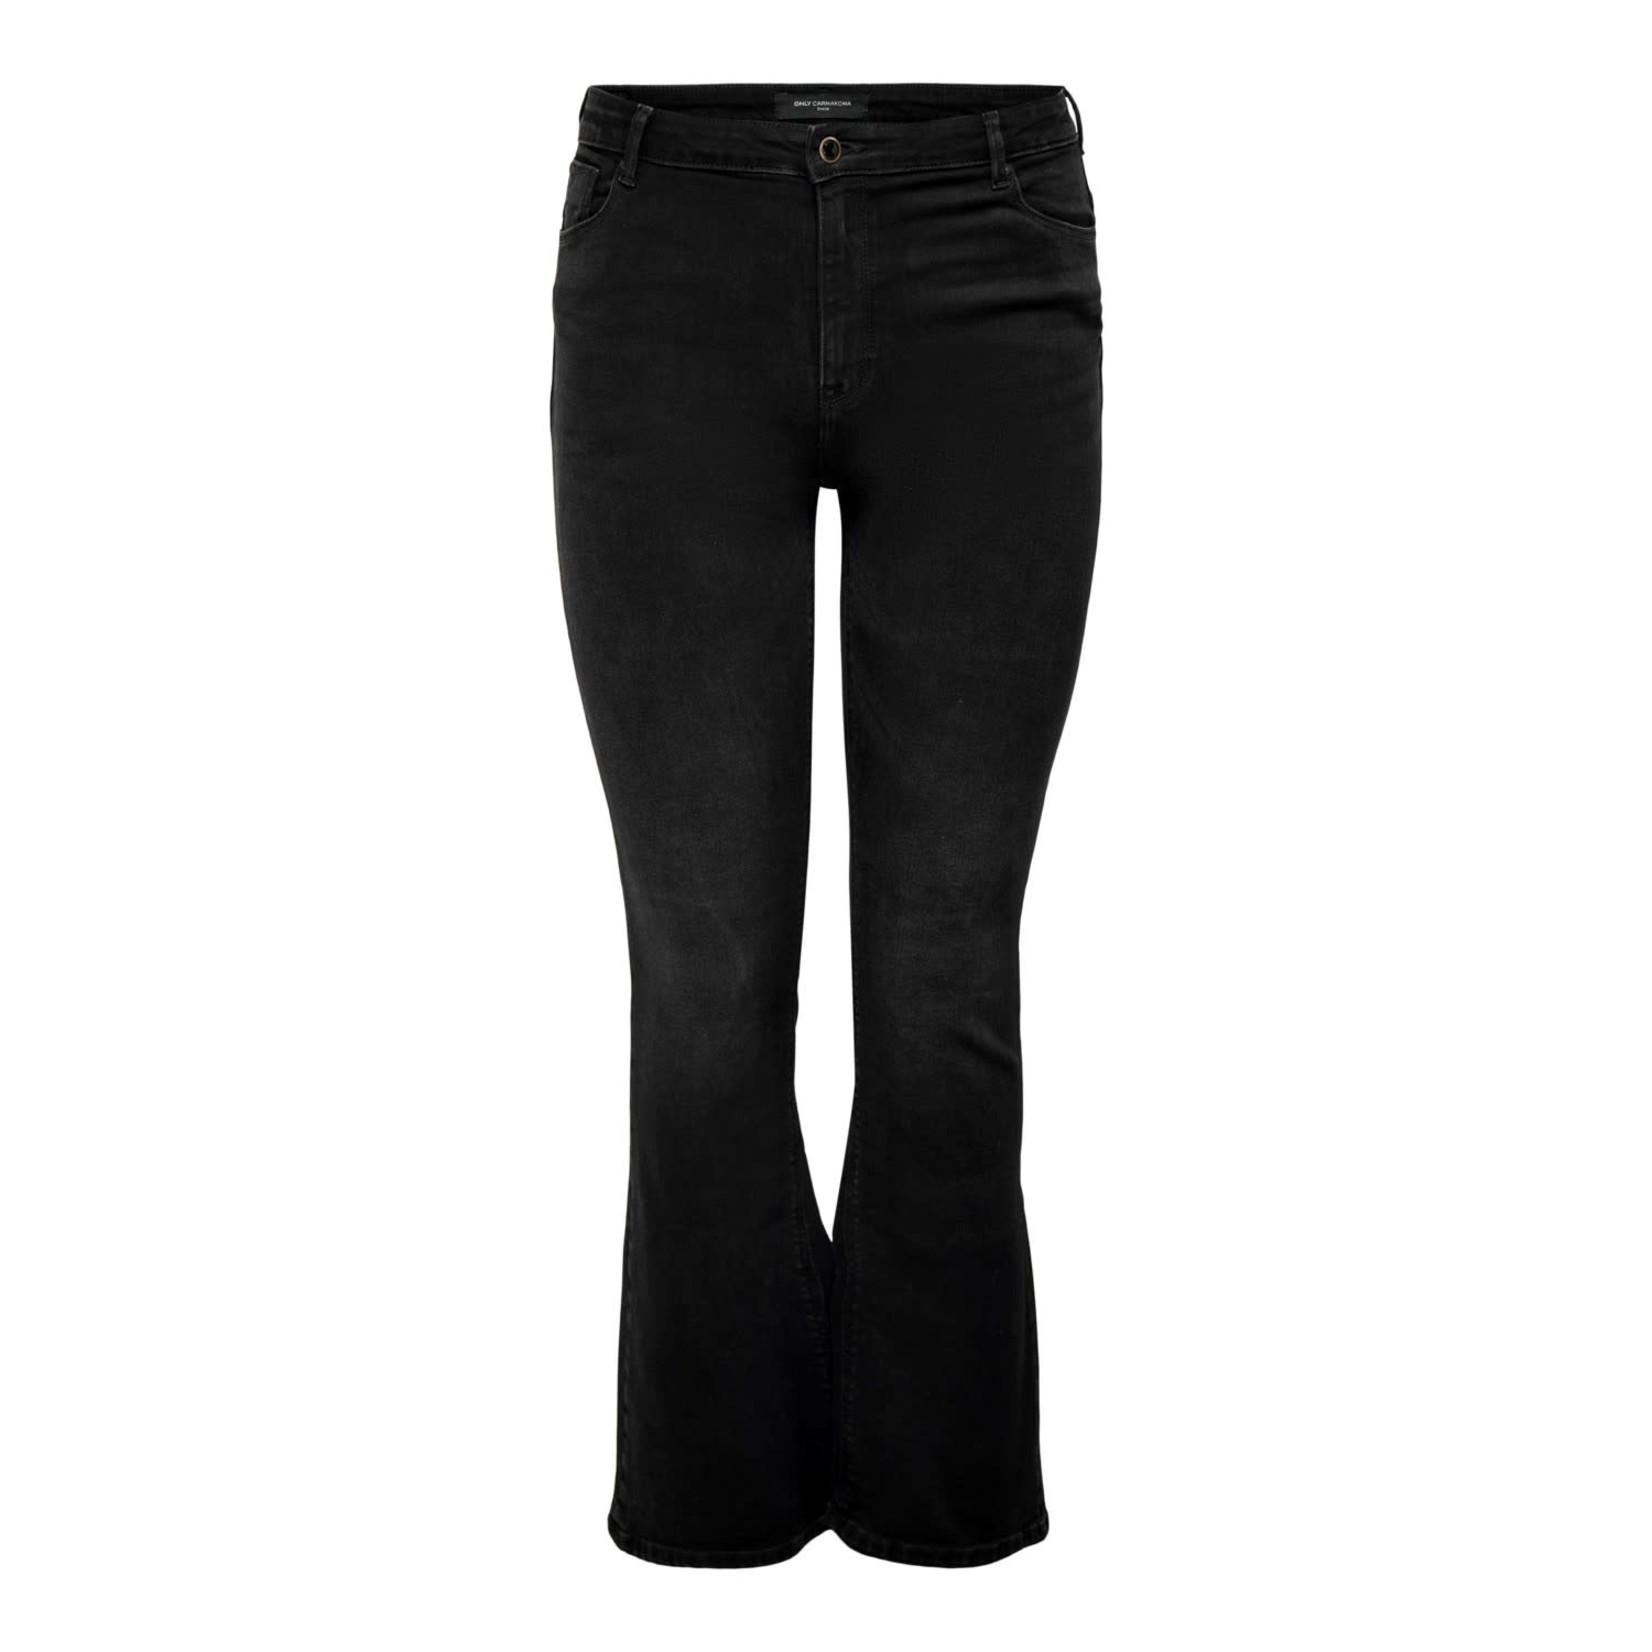 Carsally High waist Flared Jeans NOOS